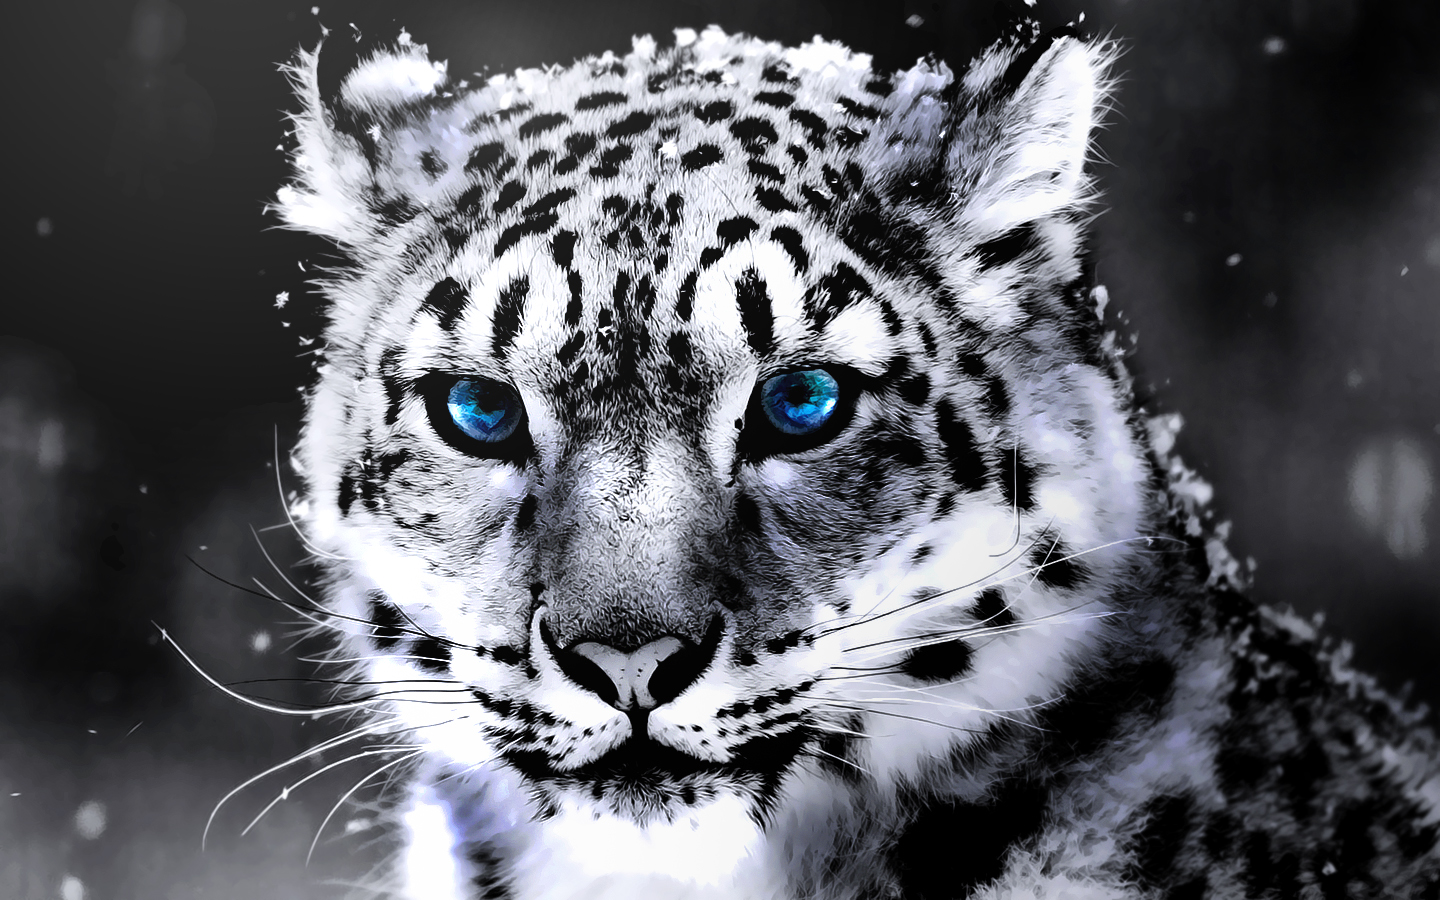 White Tiger 1440x900   hebusorg   High Definition Wallpapers   HD 1440x900